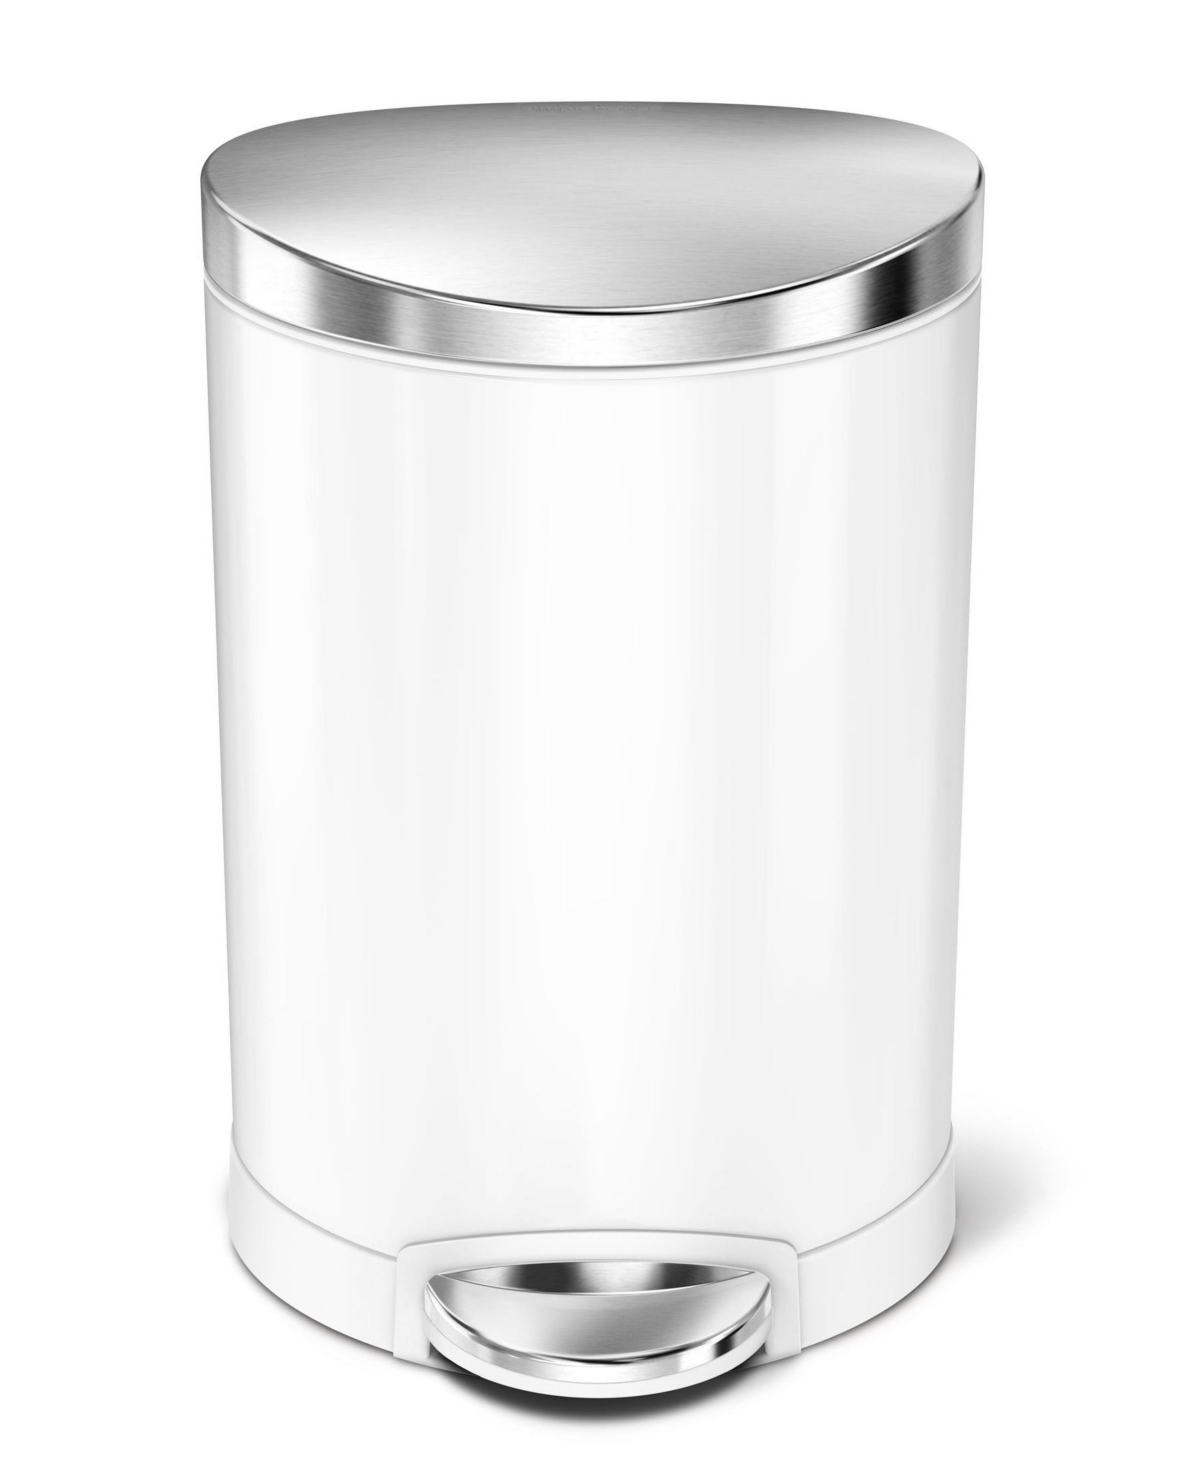 Shop Simplehuman 6 Litre Steel Semi-round Step Can Steel In White Stainless Steel